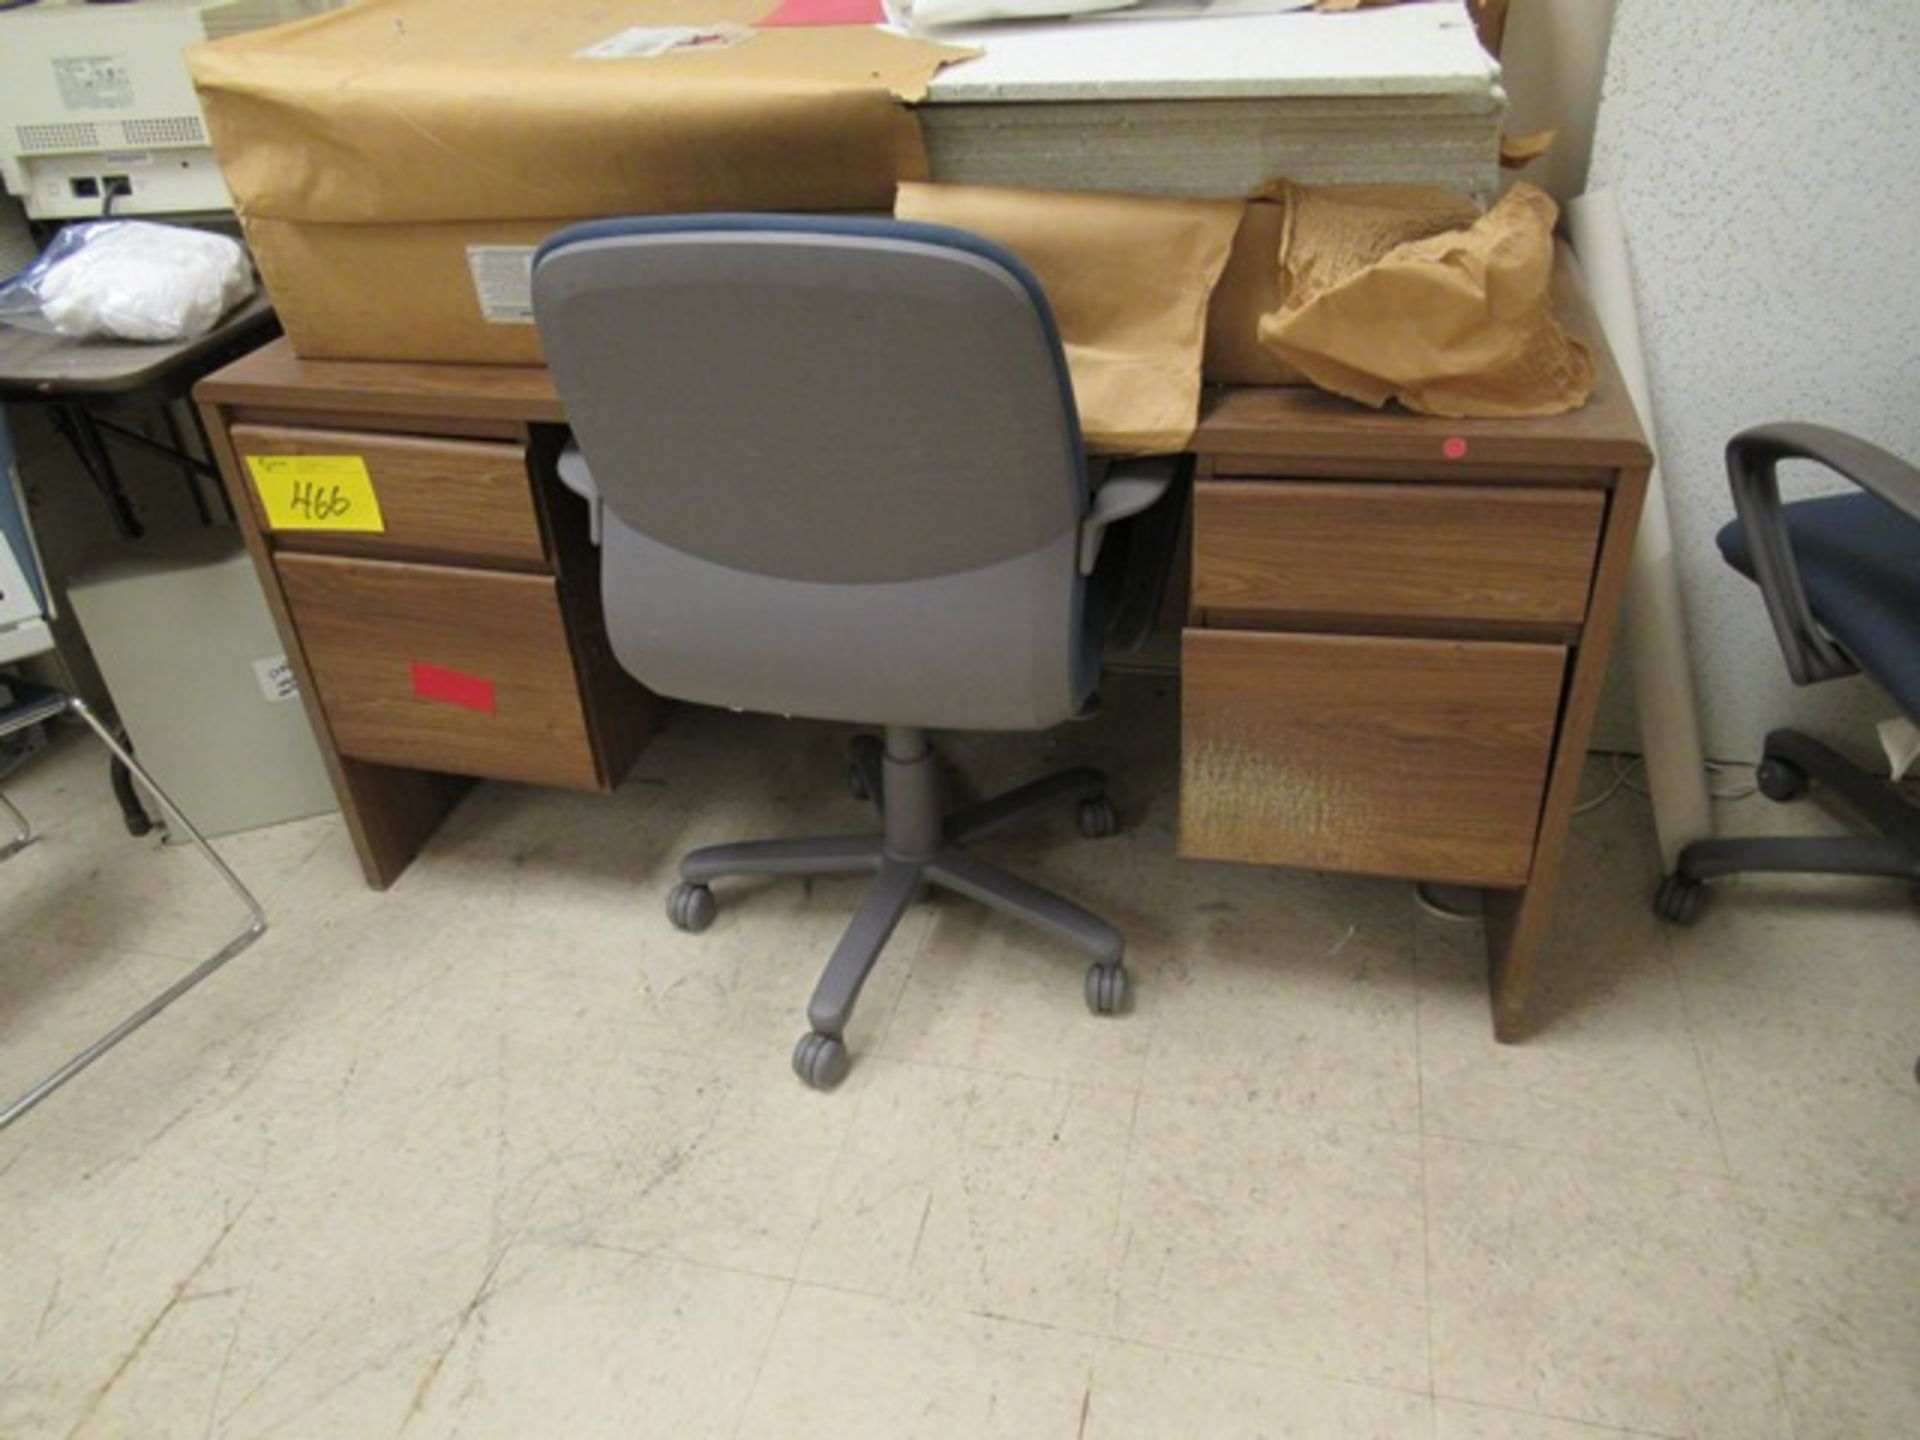 LOT ASST. OFFICE FURNITURE, BLUE PRINT COPIER, FILE CABINETS, CHAIRS, ETC. (MO2NDF) - Image 4 of 5